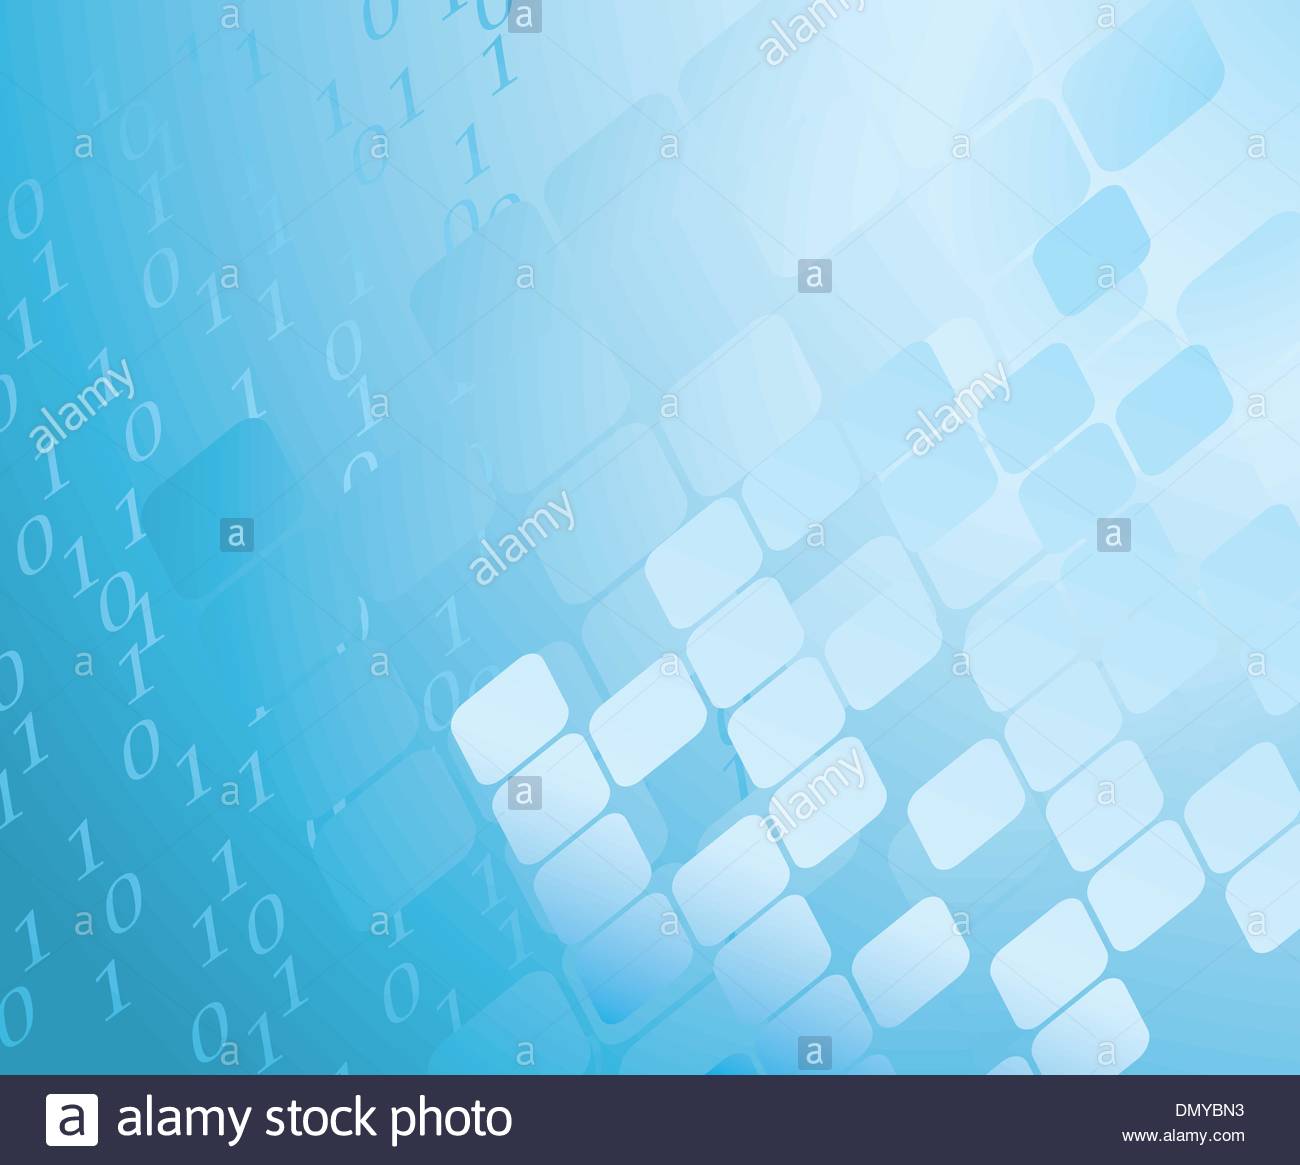 Vector Abstract Blue Background With Figures Stock Art